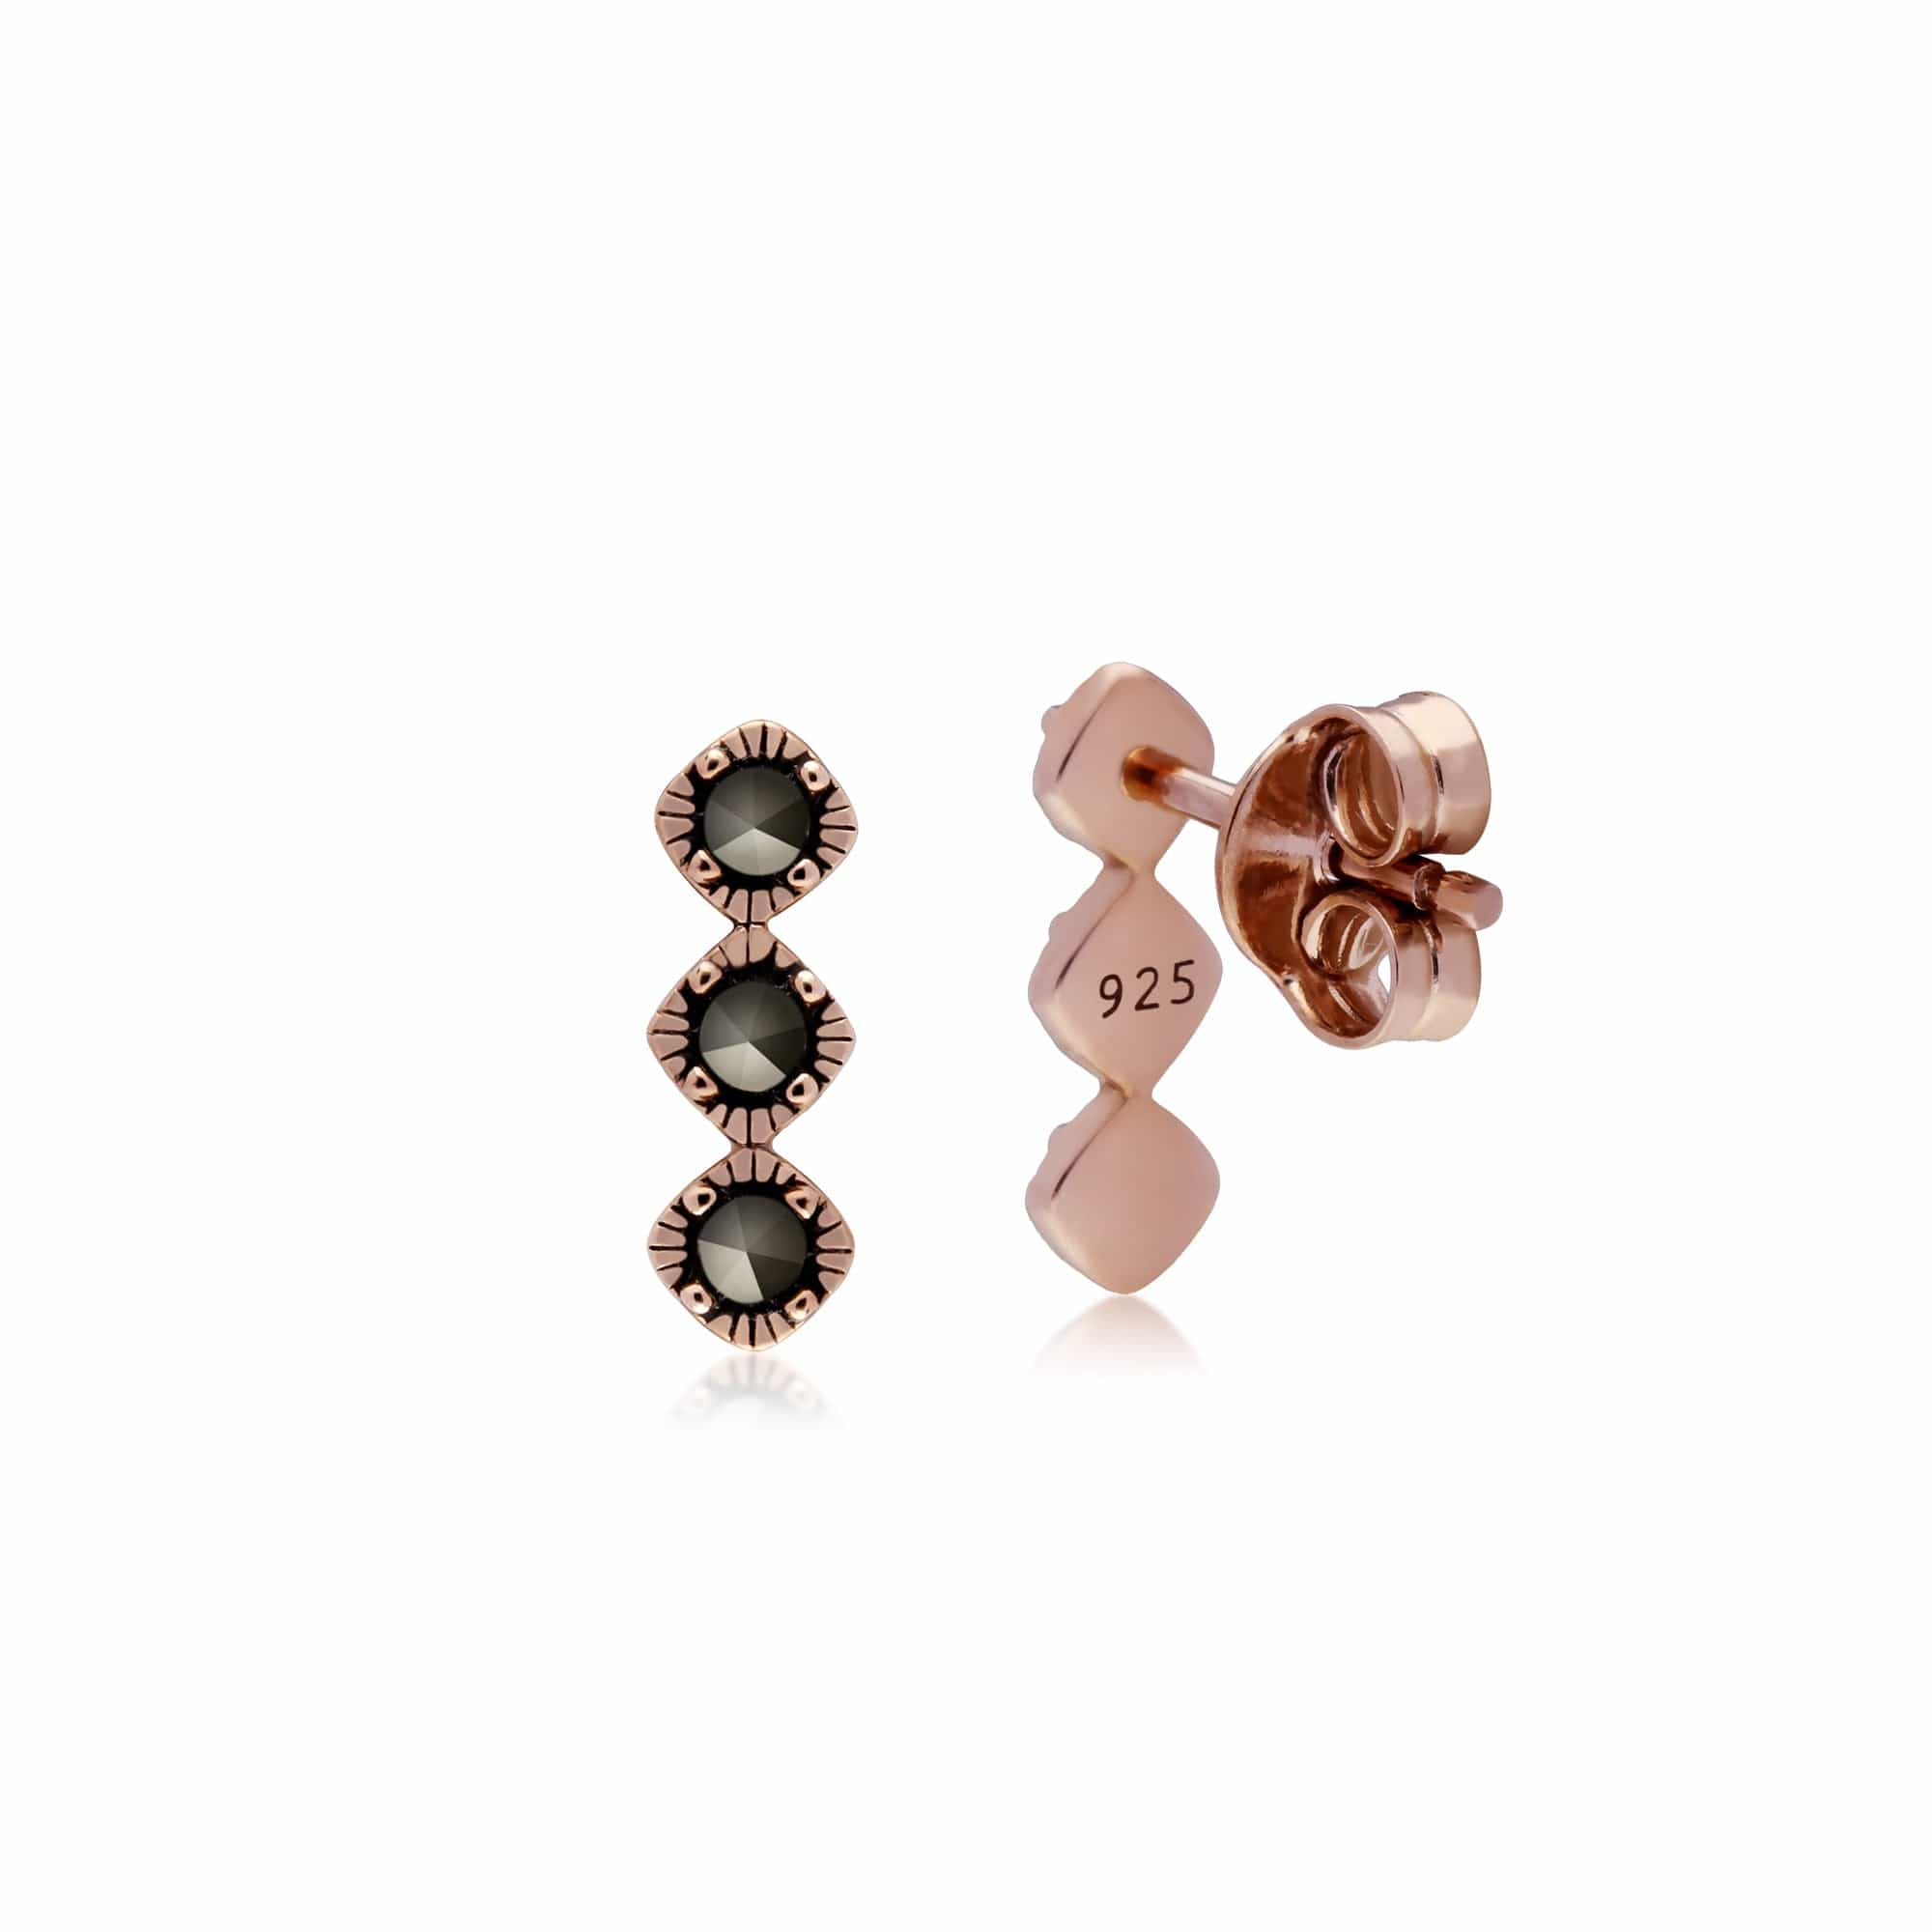 224E023101925 Rose Gold Plated Round Marcasite Triple Stone Stud Earrings in 925 Sterling Silver 2